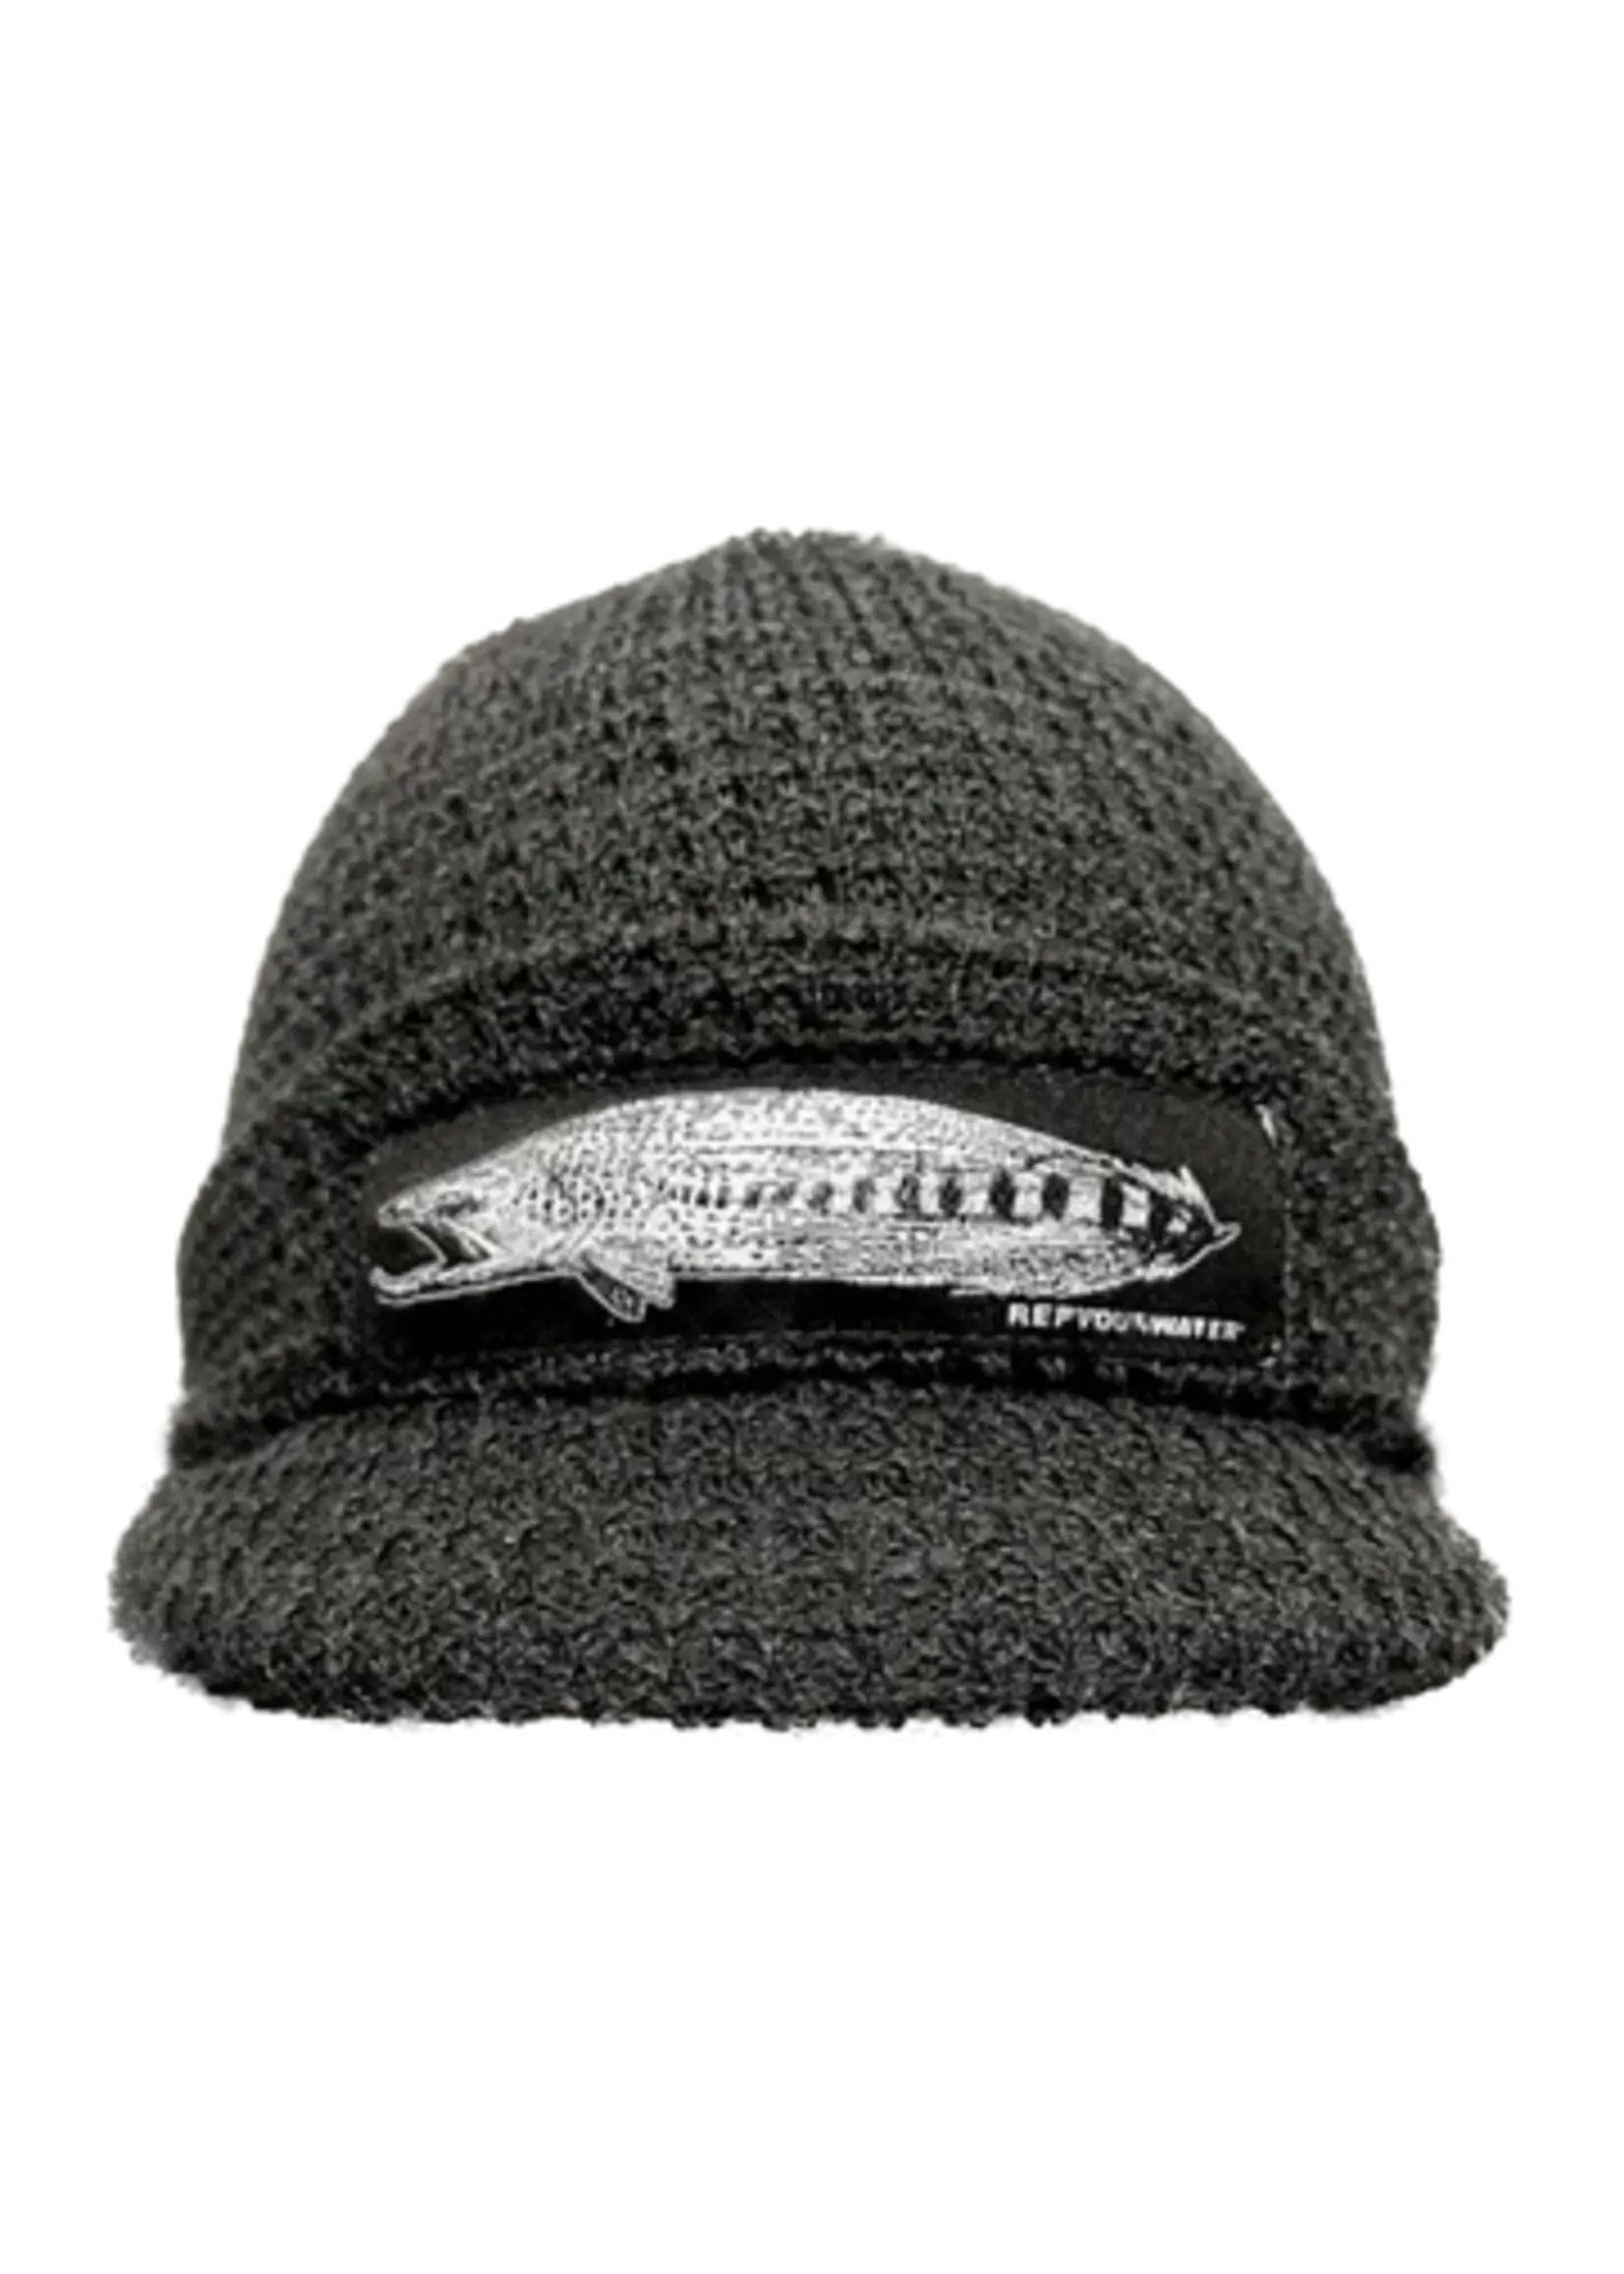 Rep Your Water RepYourWater Salmo Streamer Knit Hat